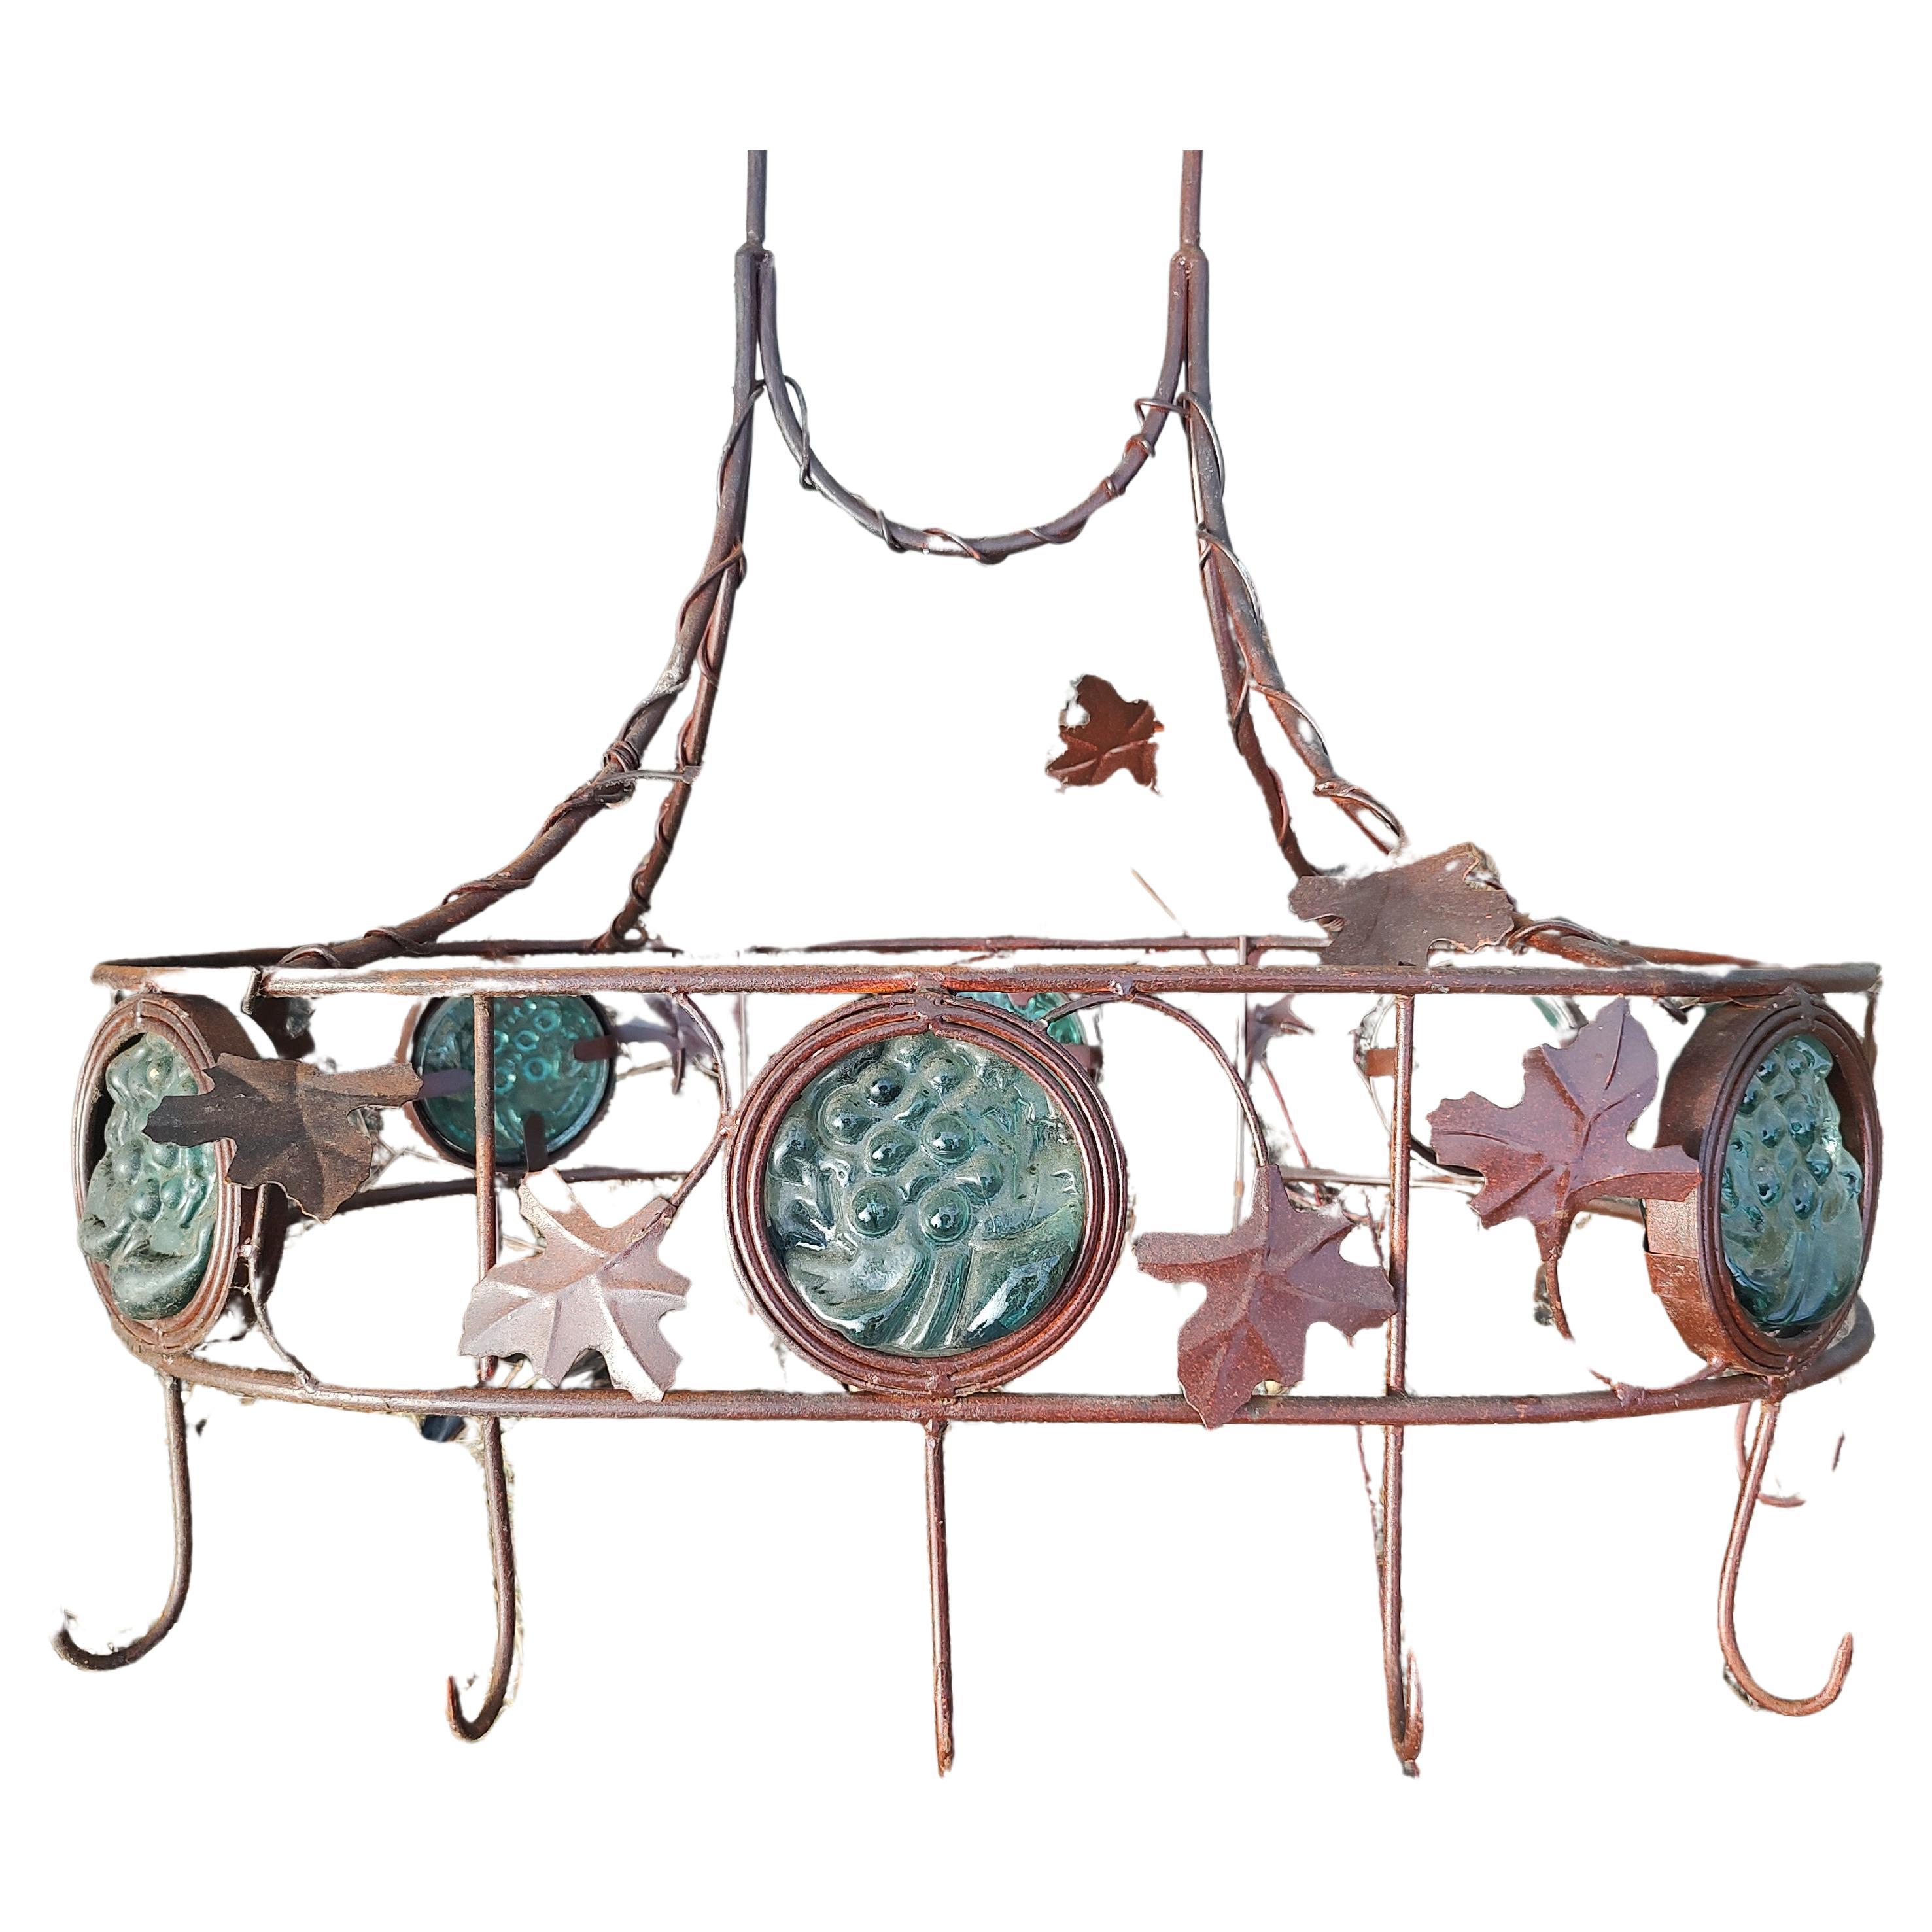 Hand-Crafted Wrought Iron with Decorative Stained Glass Panels Hanging Pot Rack For Sale